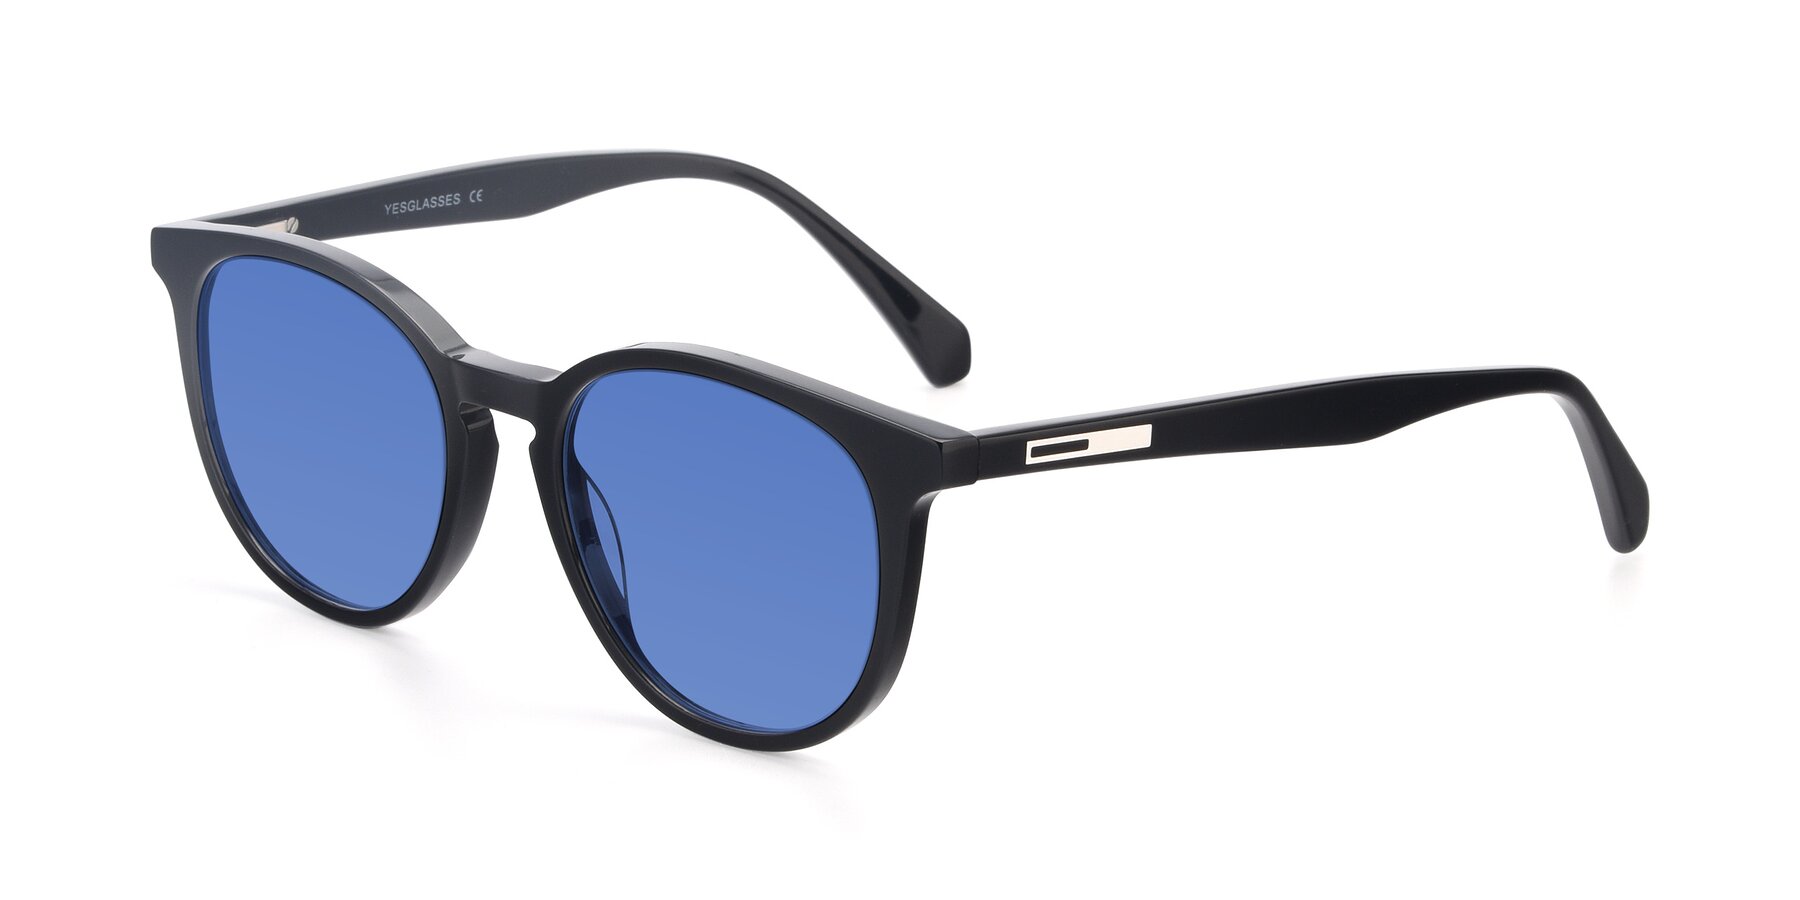 Angle of 17721 in Black with Blue Tinted Lenses